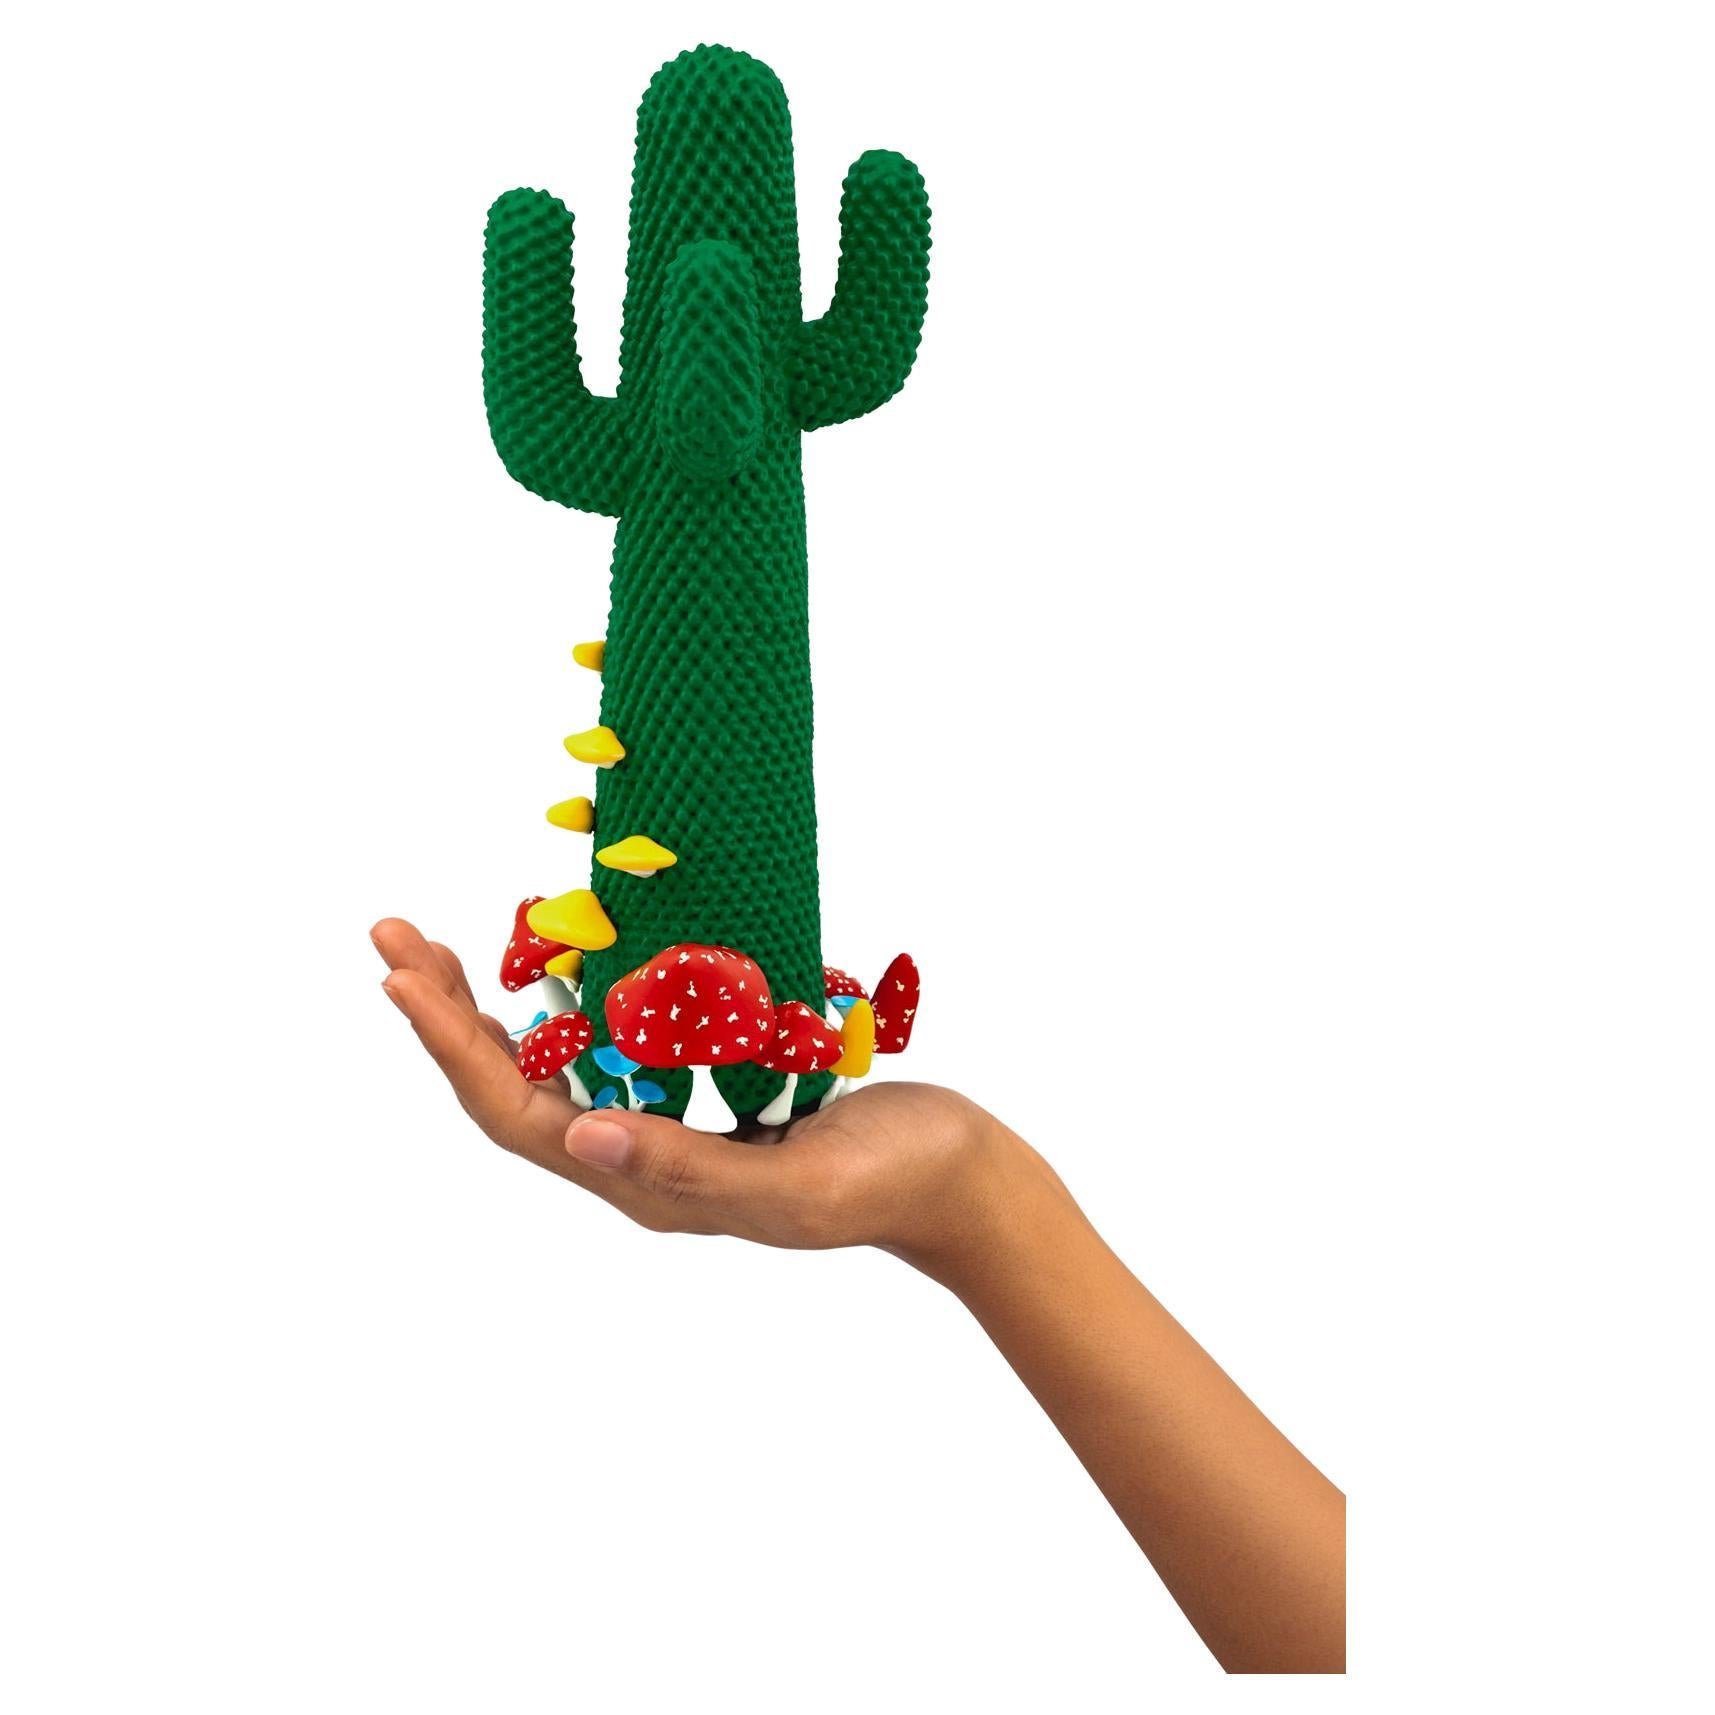 LIMITED EDITION #90/99

Gufram presents the miniaturised version of the Shroom CACTUS® created in collaboration with A$AP Rocky and the artist’s new design studio HOMMEMADE Exactly as the real-size Shroom CACTUS®, the new Guframini piece features